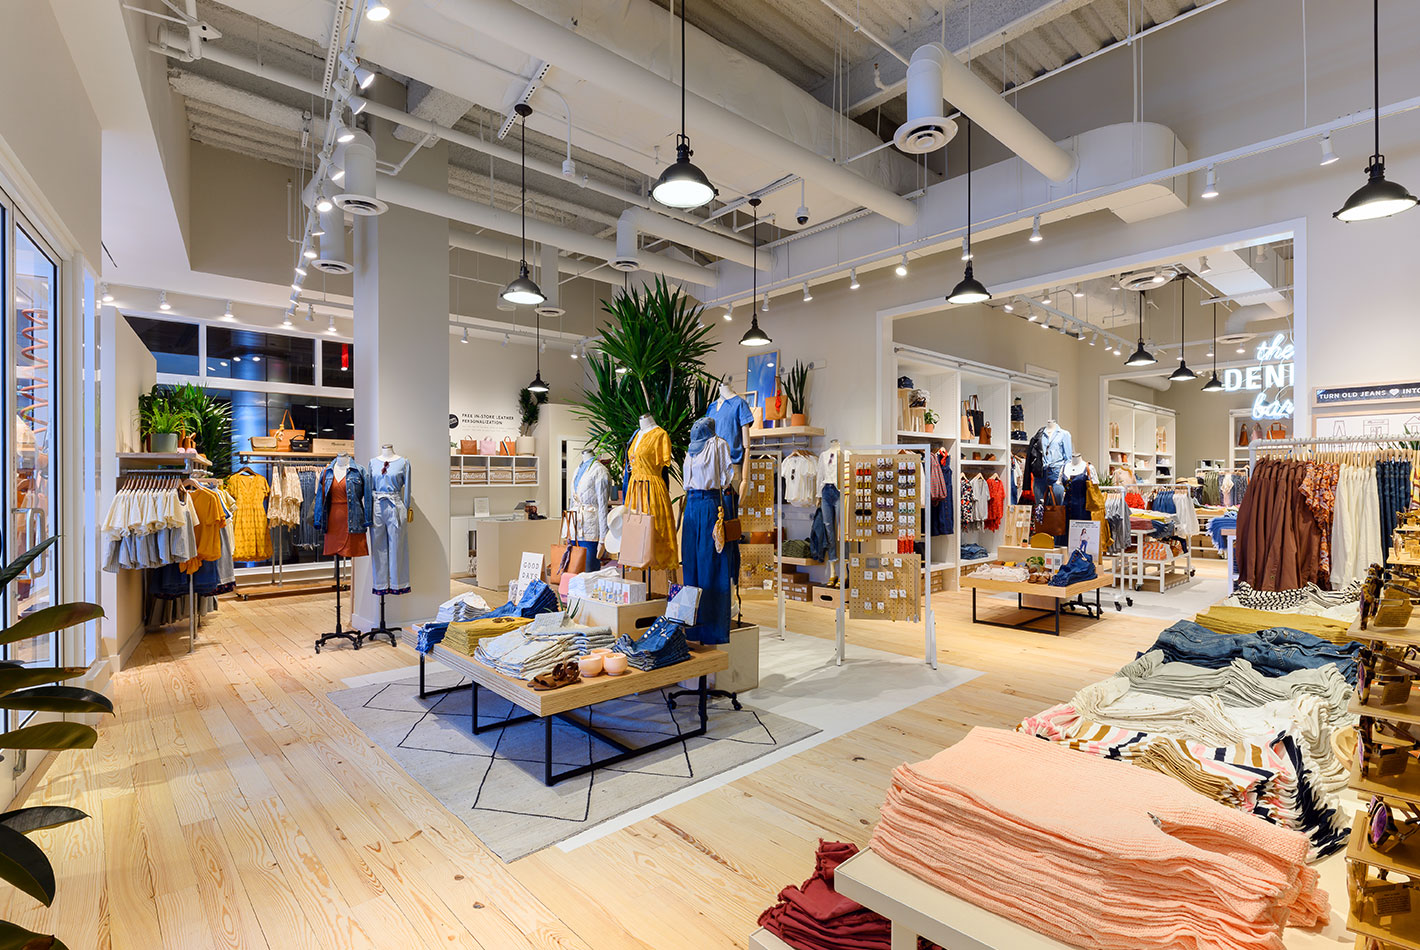 The women's department at Madewell features a collection of indigo-hued clothing and accessories. Jeans, t-shirts, and dresses are displayed around the space.